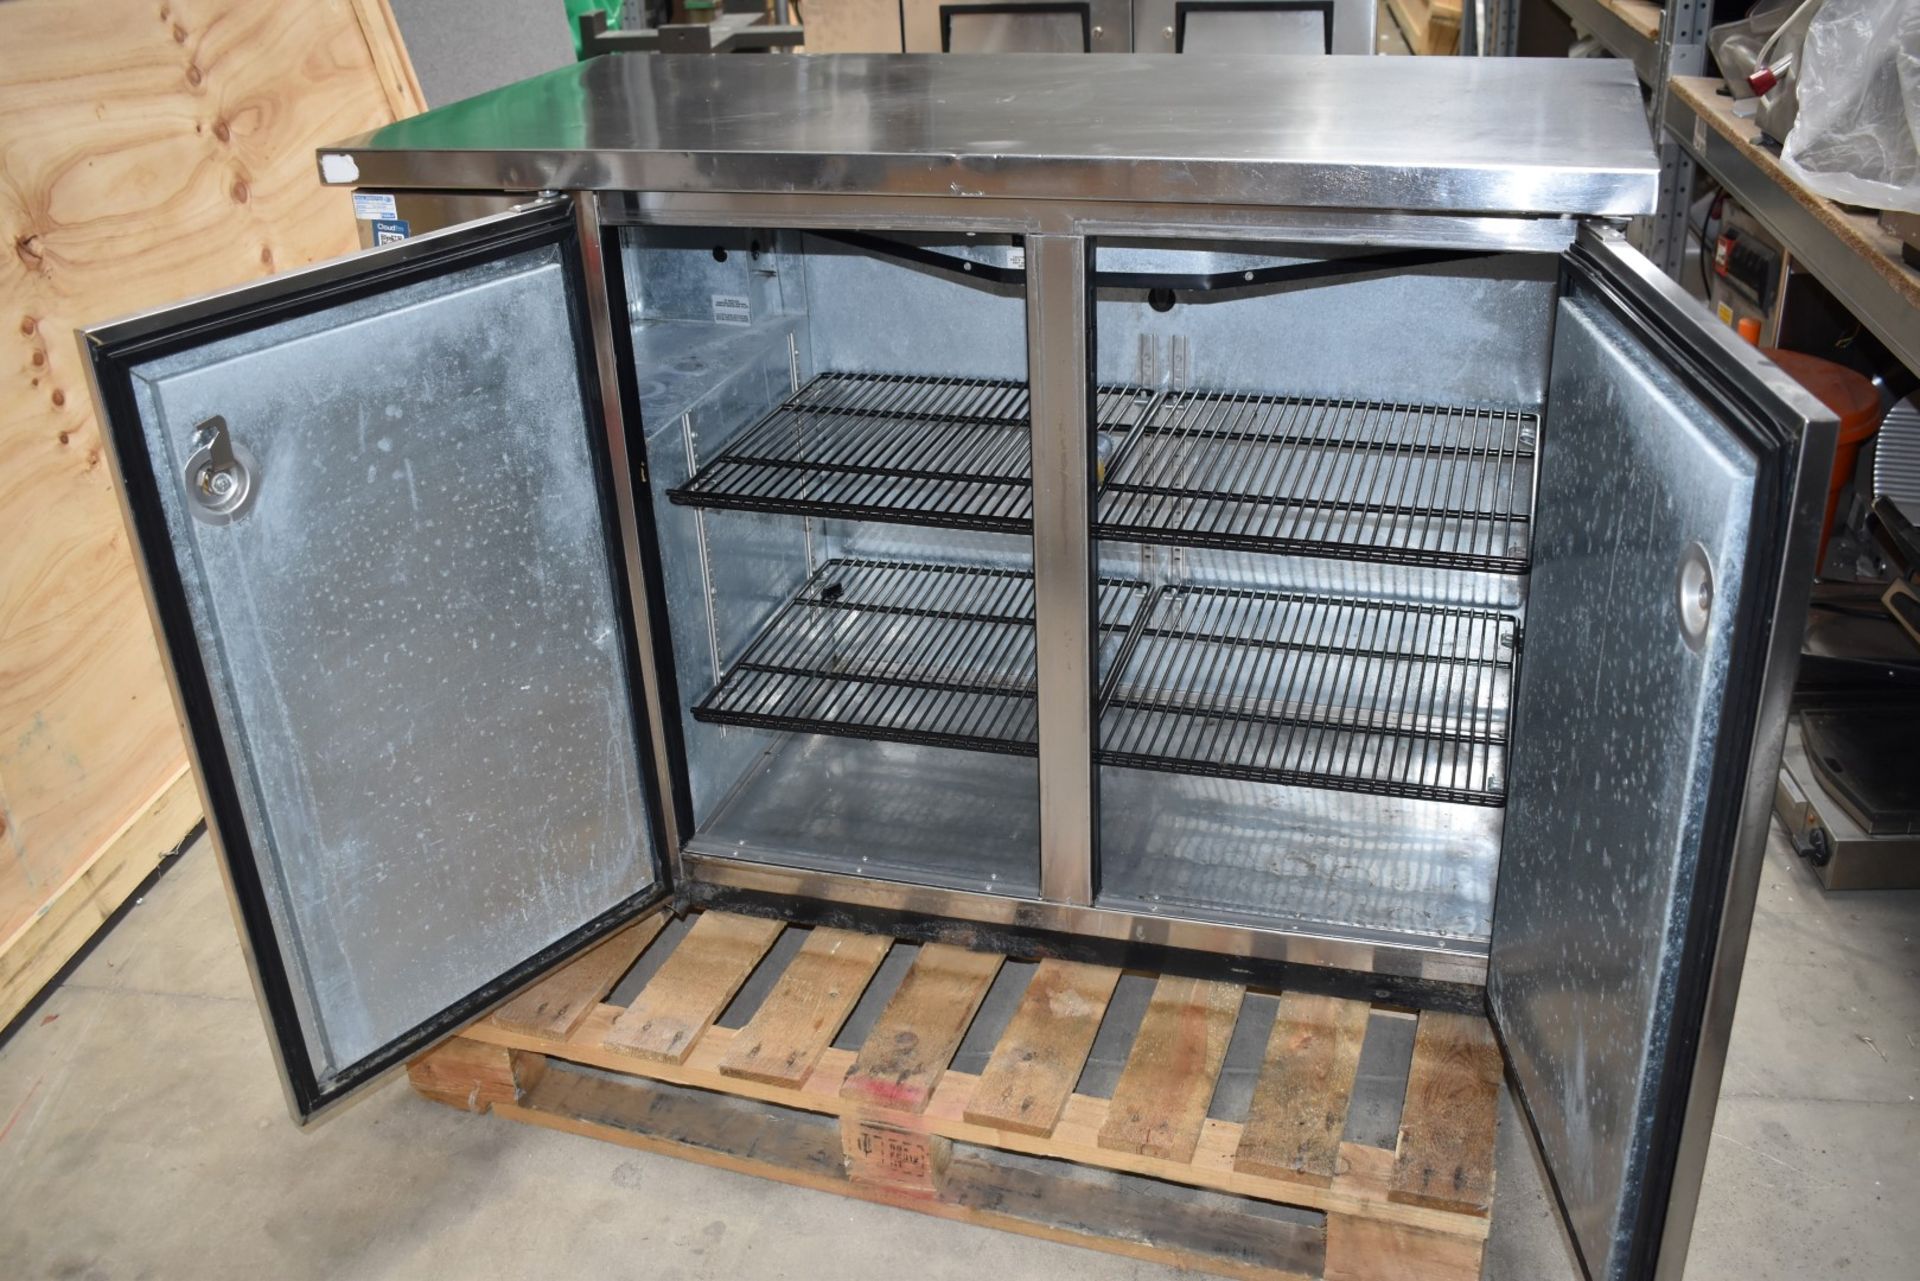 1 x True Back Bar Bottle Cooler With Solid Stainless Steel Doors and Counter Top - Model TBB-24-48-S - Image 6 of 11